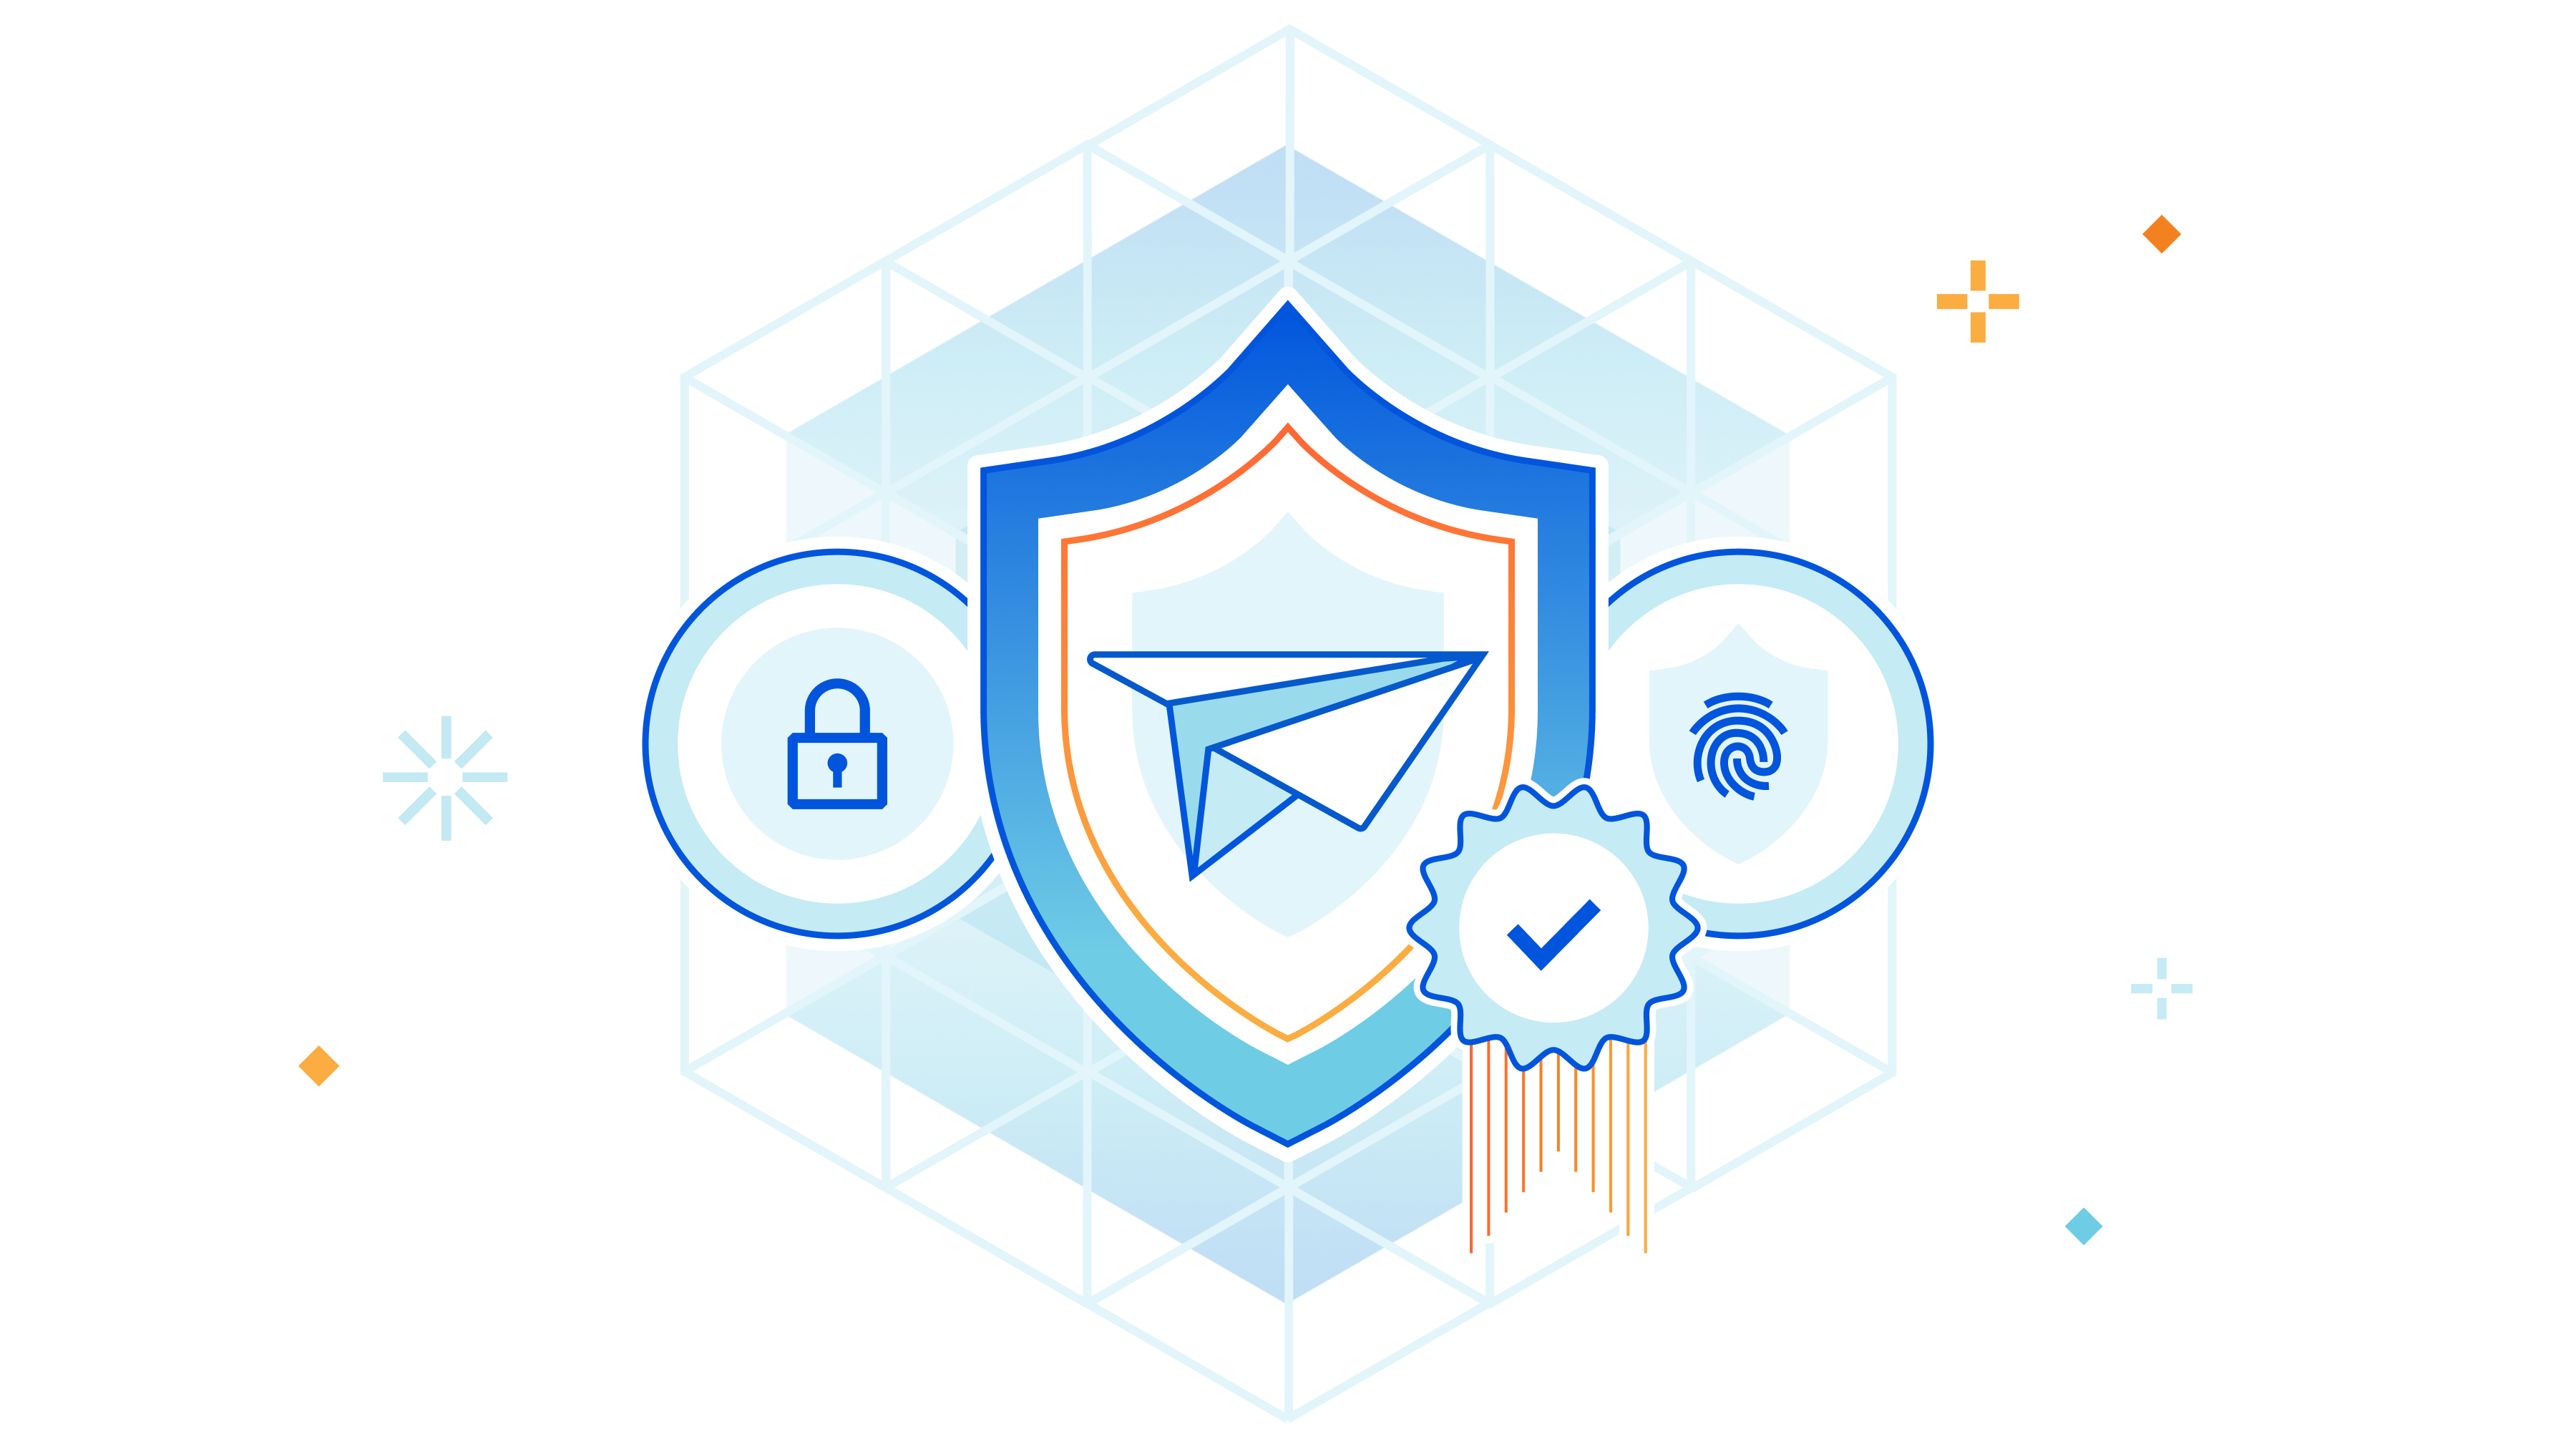 Email security services overview illustration